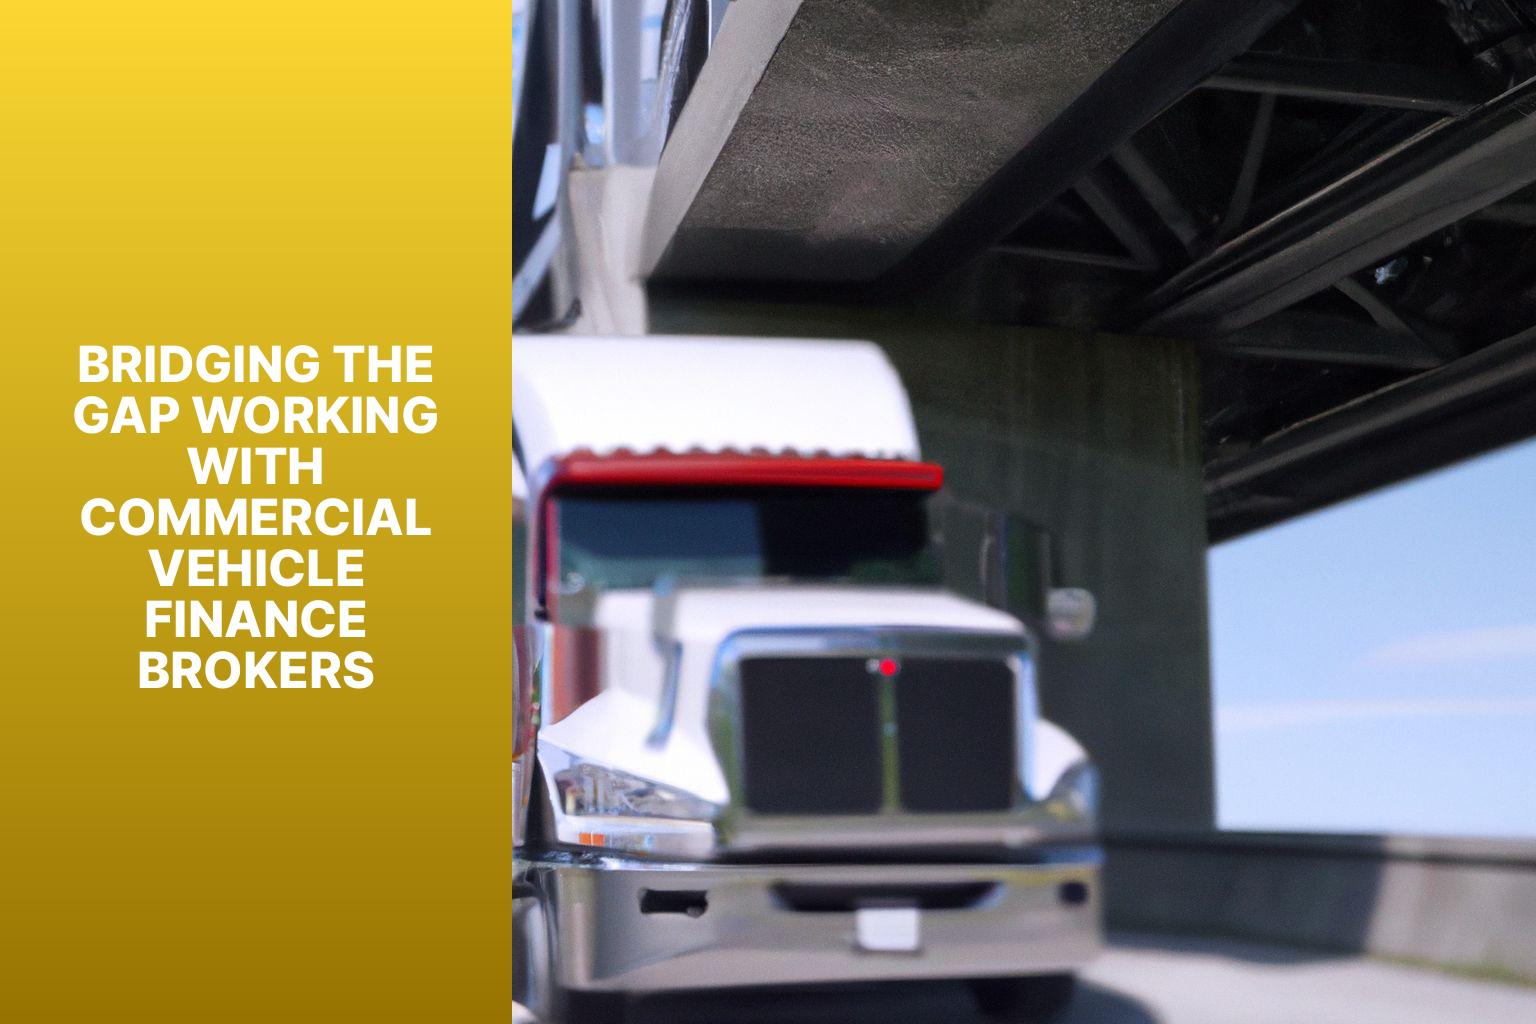 Bridging the Gap Working with Commercial Vehicle Finance Brokers